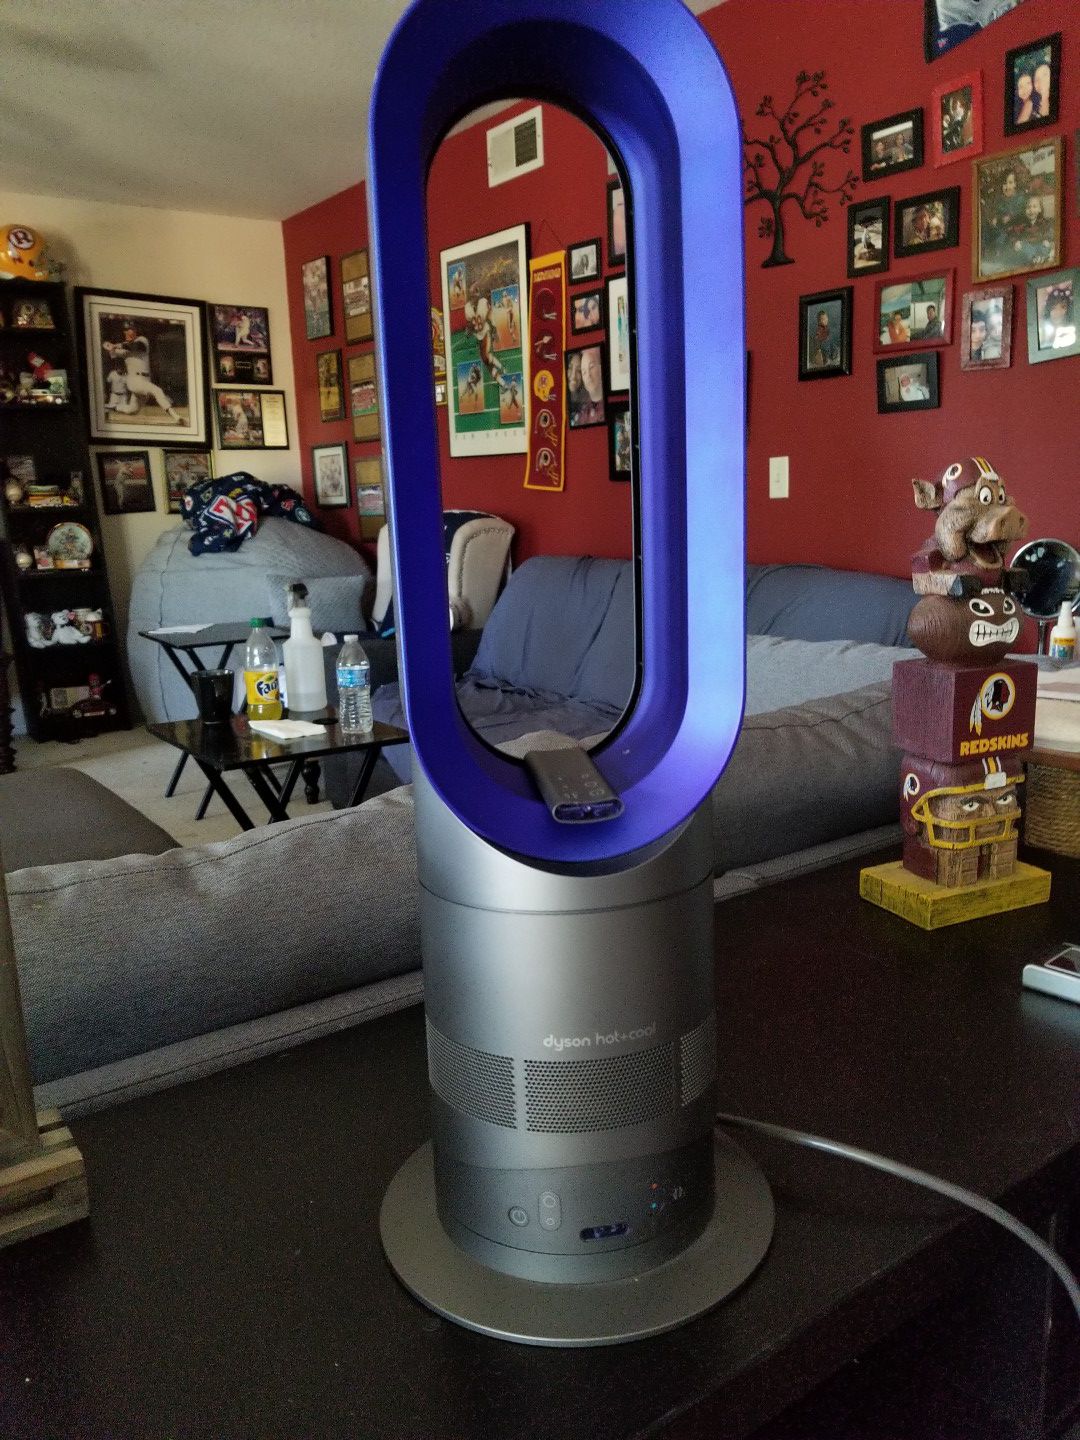 Dyson hot and cool fan and heater